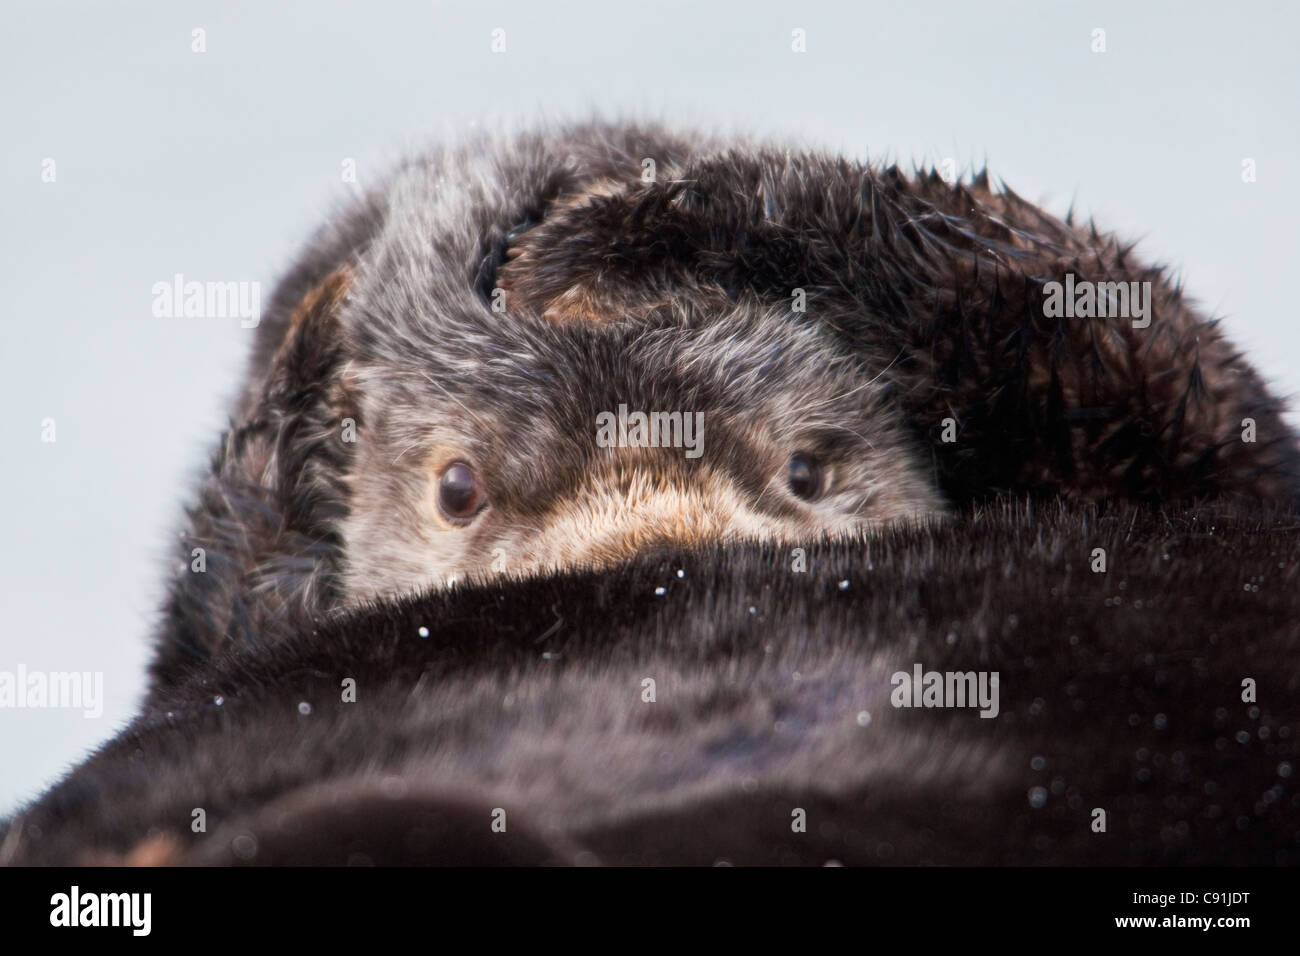 Sea otter peeking under arms while covering ears with paws, Prince William Sound, Southcentral Alaska, Winter Stock Photo